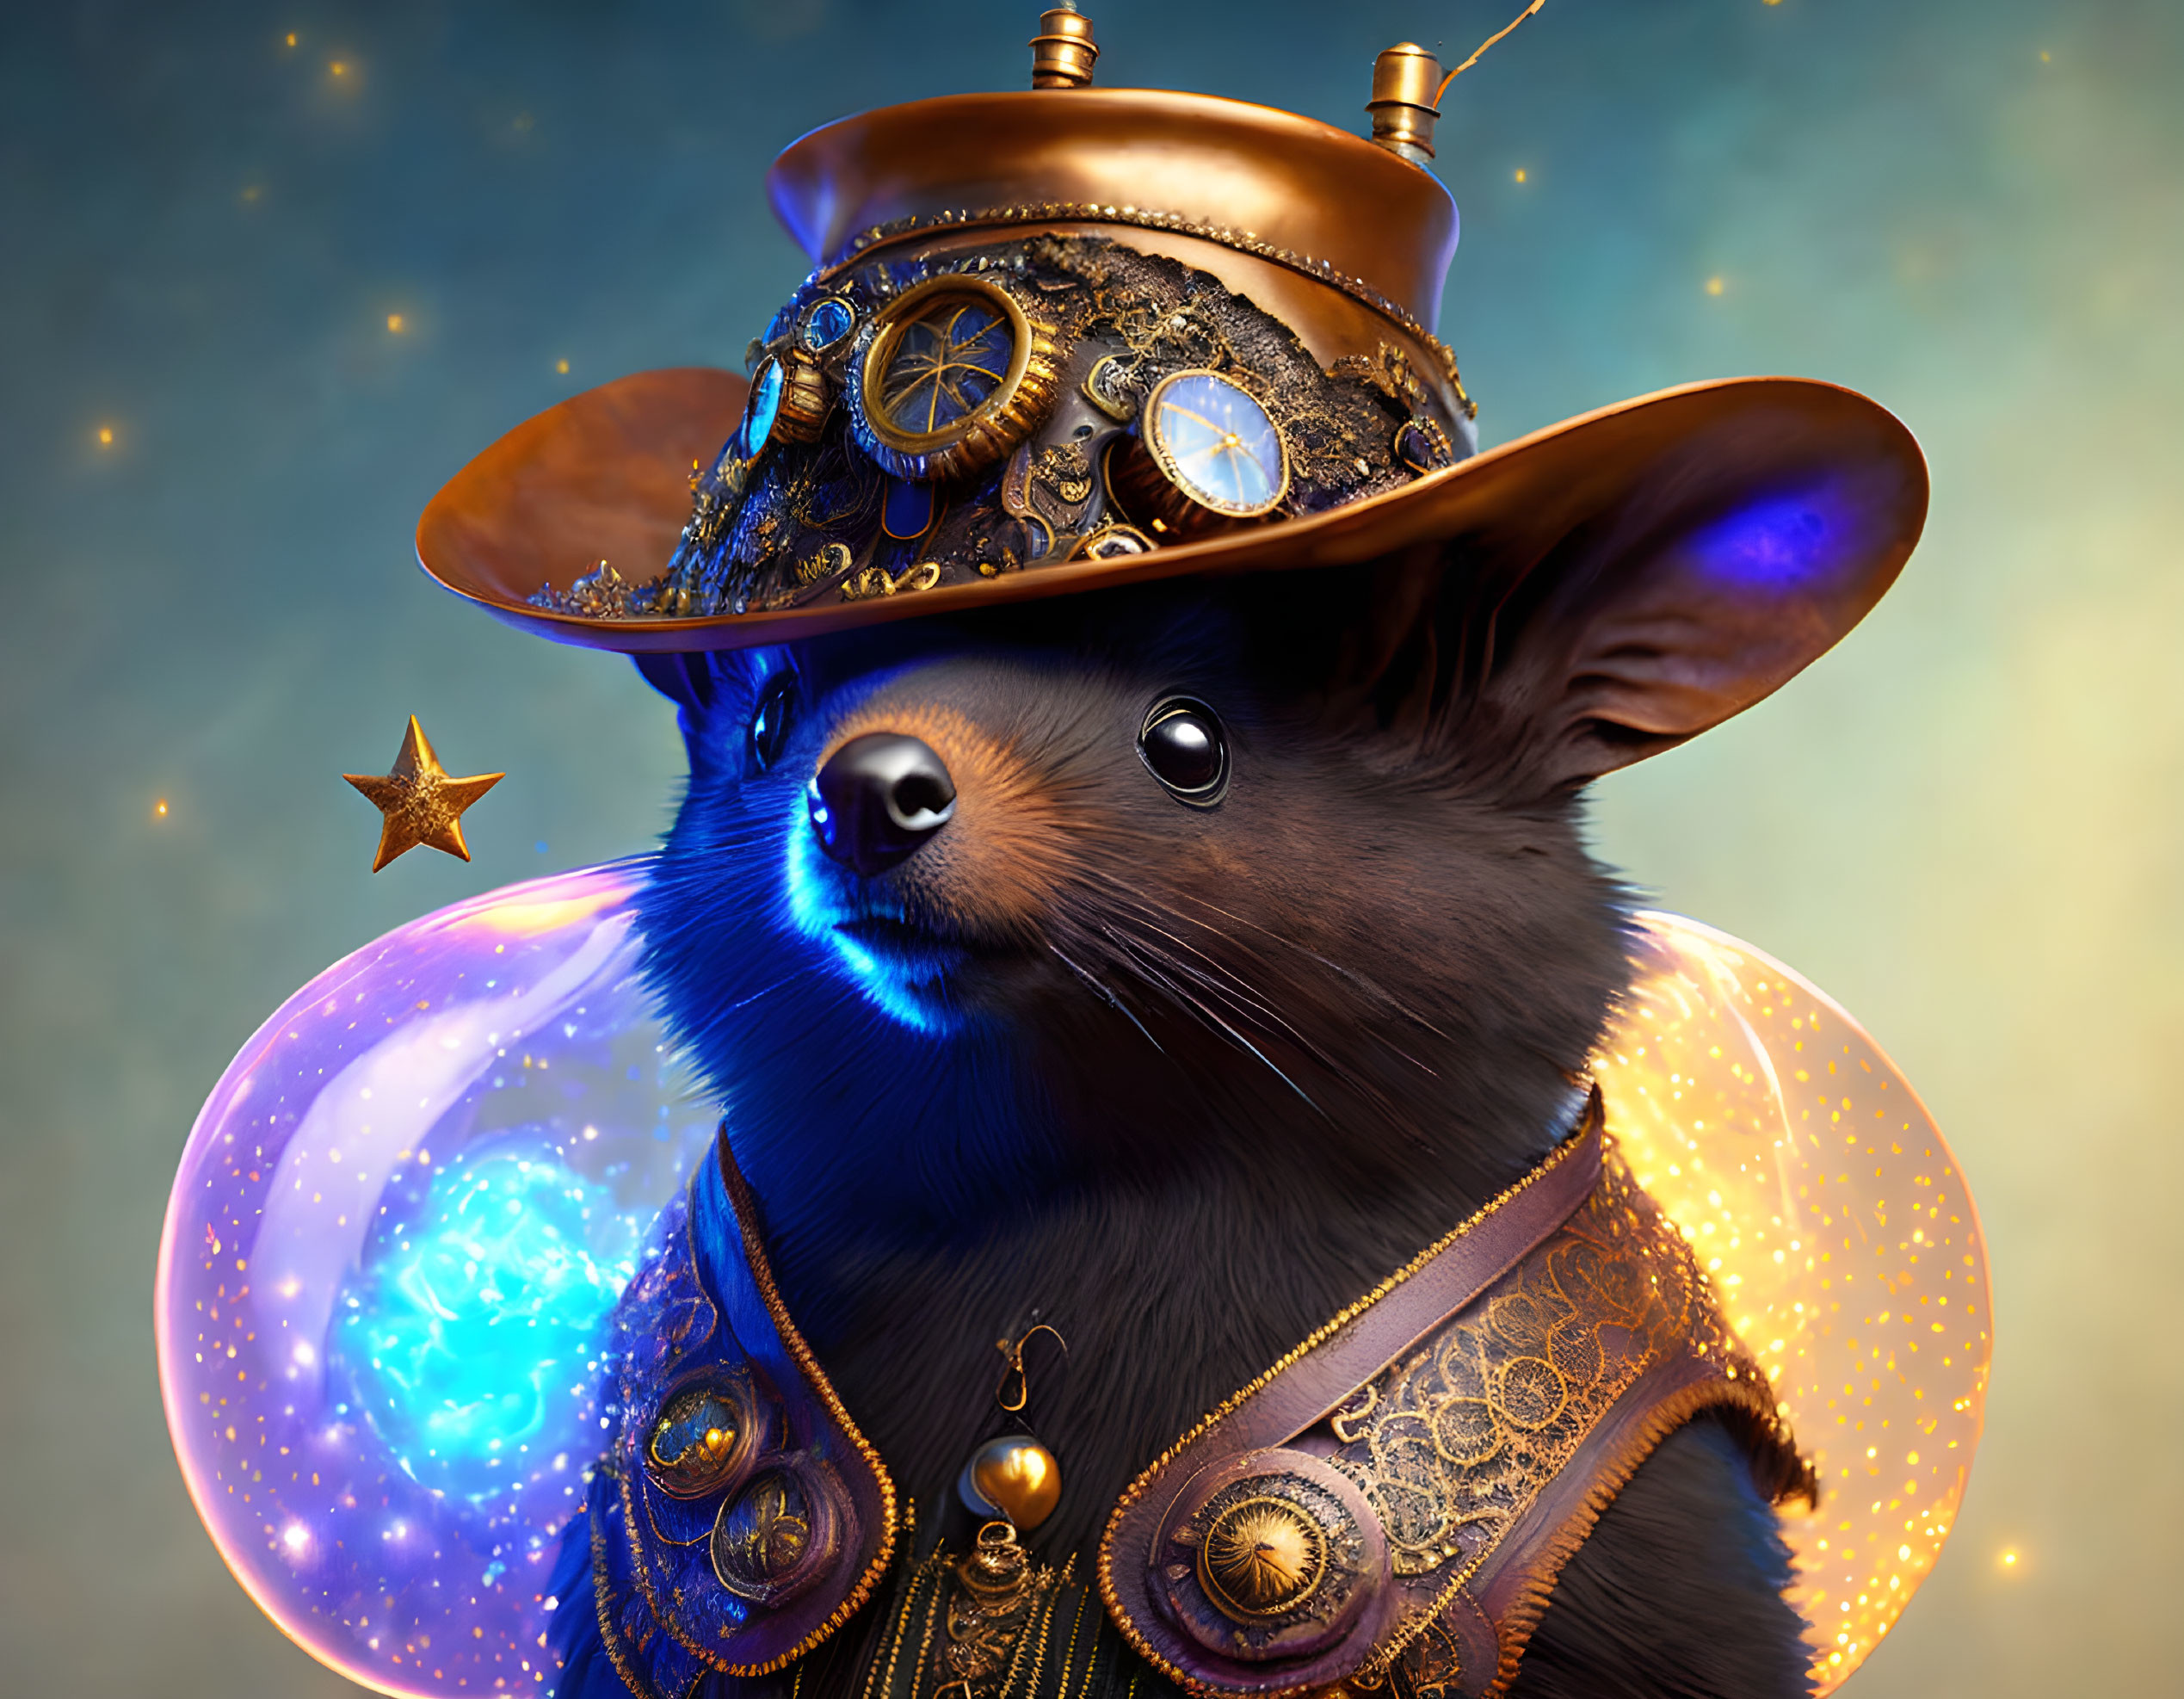 Steampunk-themed mouse illustration with magical orb and star.